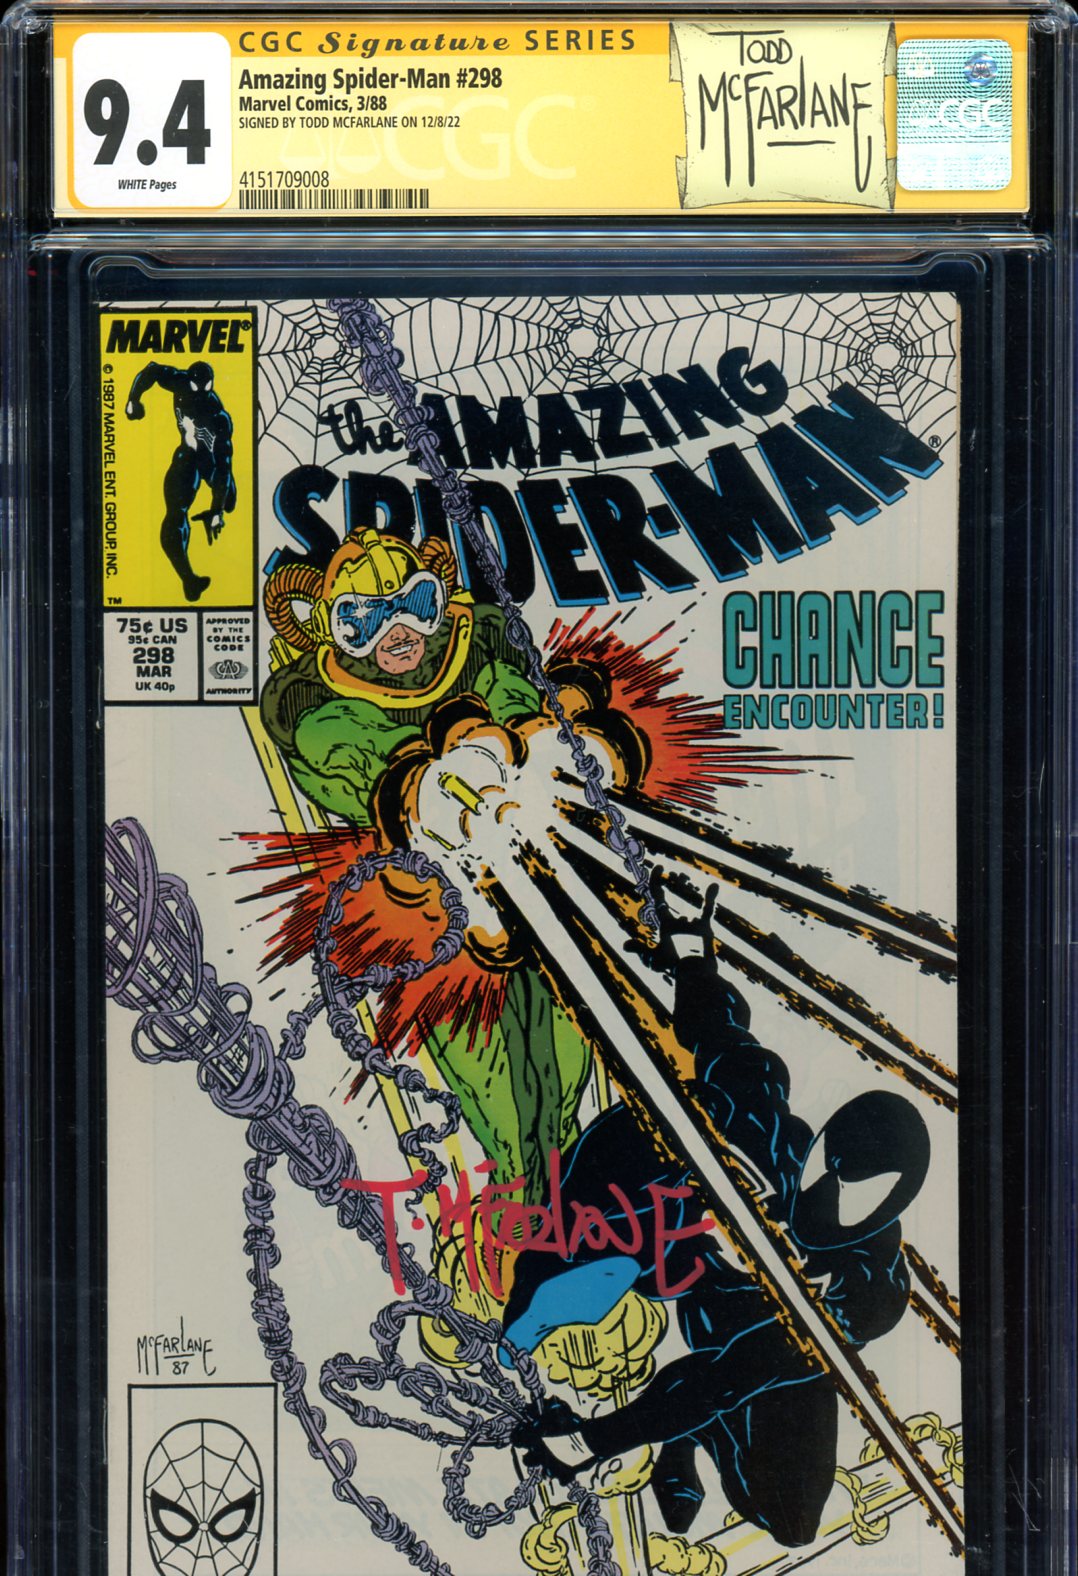 Spider-Man comic books signature series signed by McFarlane